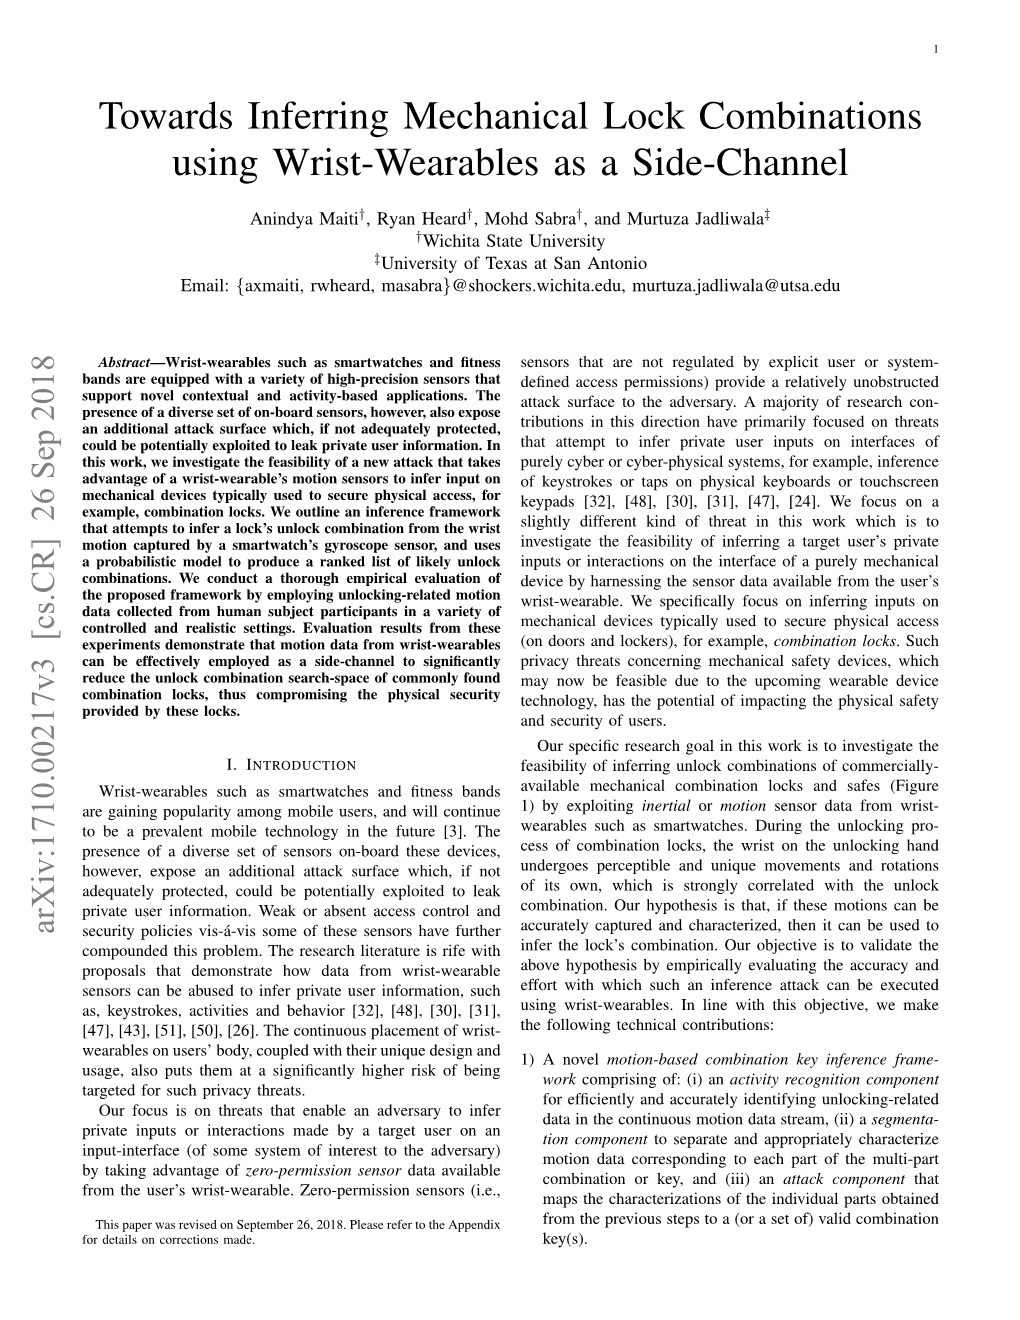 Towards Inferring Mechanical Lock Combinations Using Wrist-Wearables As a Side-Channel